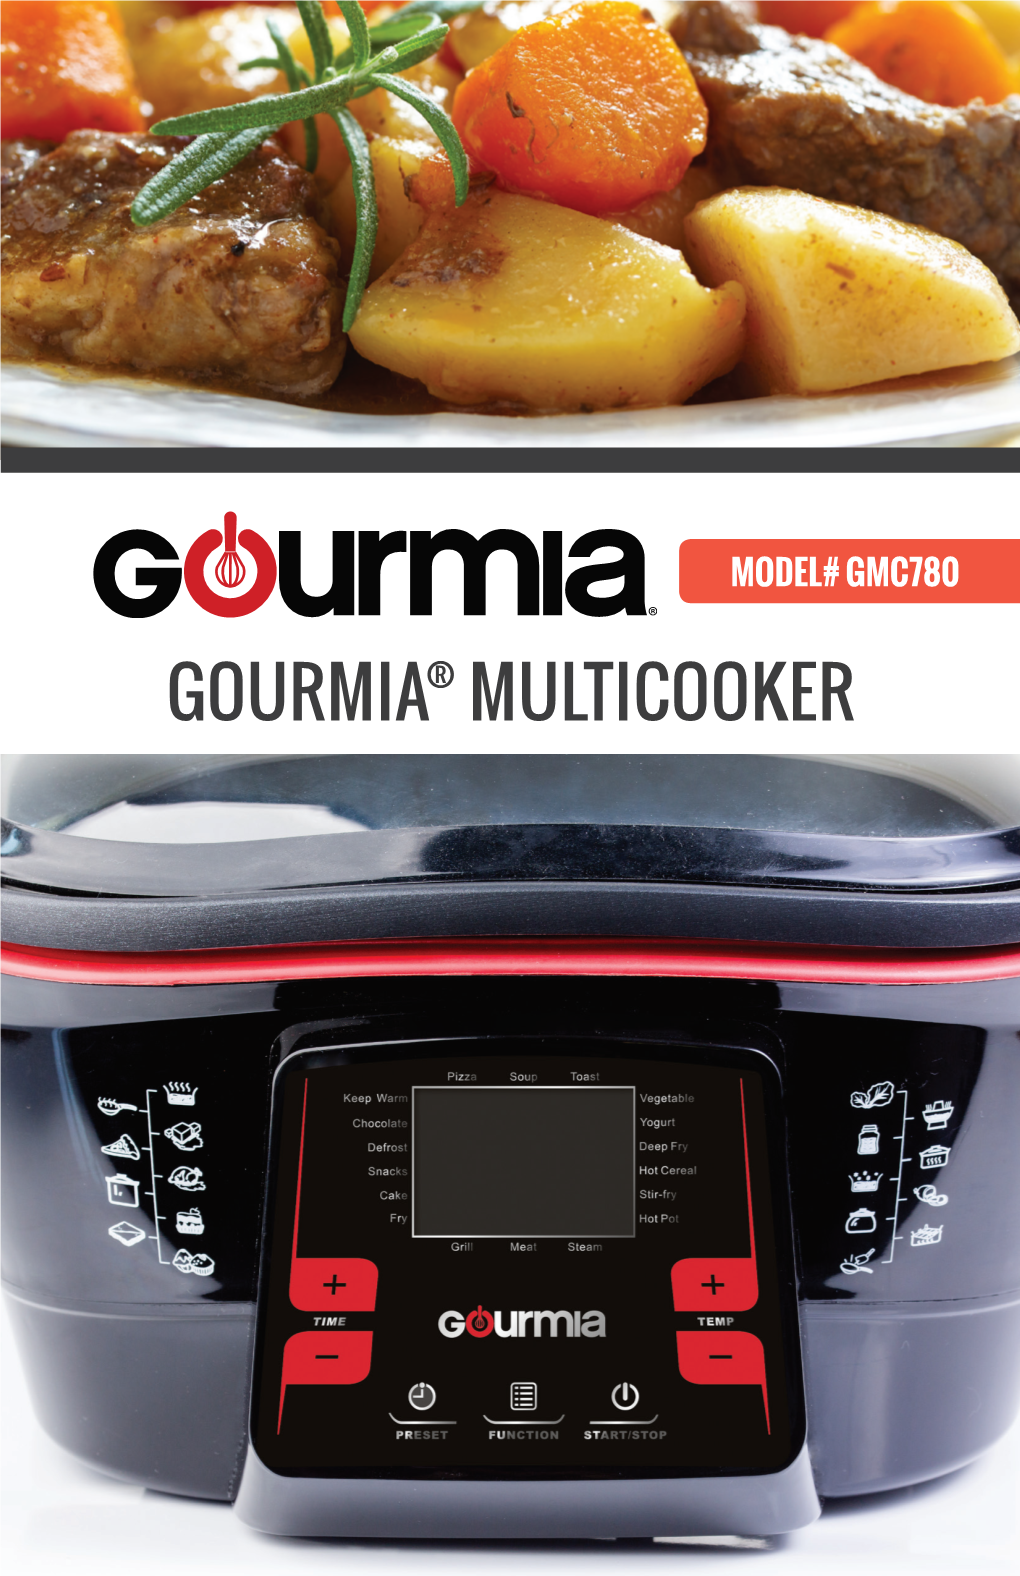 GOURMIA® MULTICOOKER © 2016 Gourmia the Steelstone Group Brooklyn, NY Welcome to Deliciously Easy Homemade Meals!